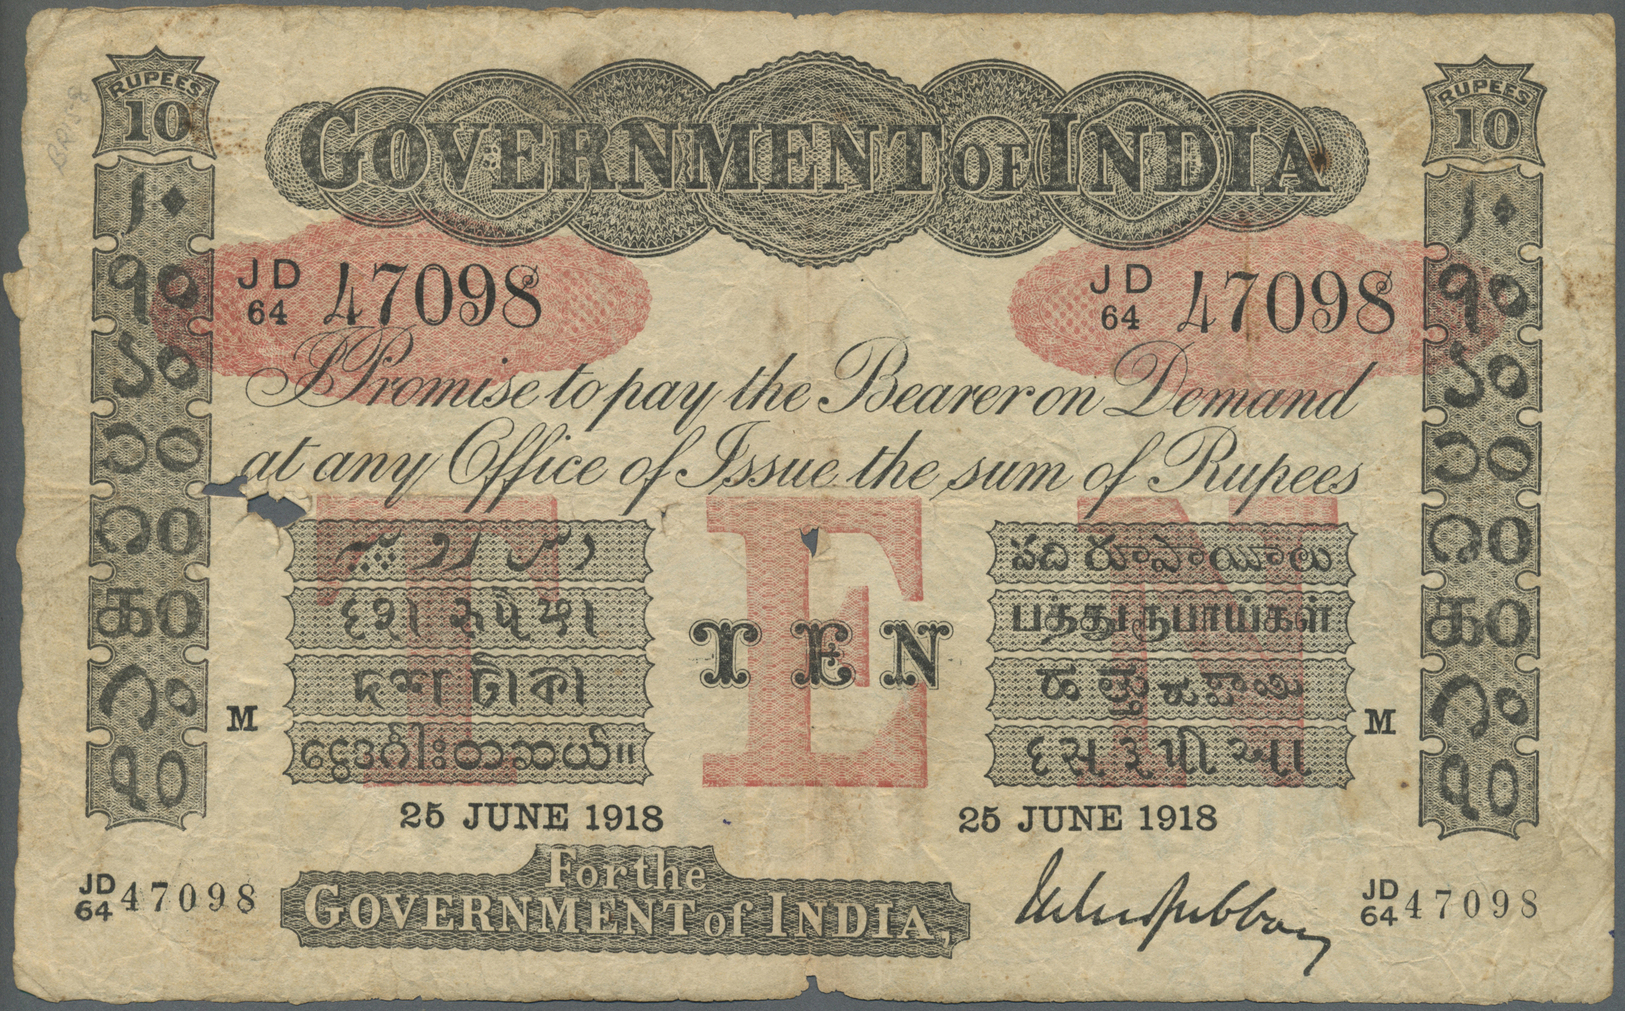 01051 India / Indien: Governtment Of India 10 Rupees 1918 MADRAS Issue P. A10, Used With Folds, Light Stain, Some Holes - India